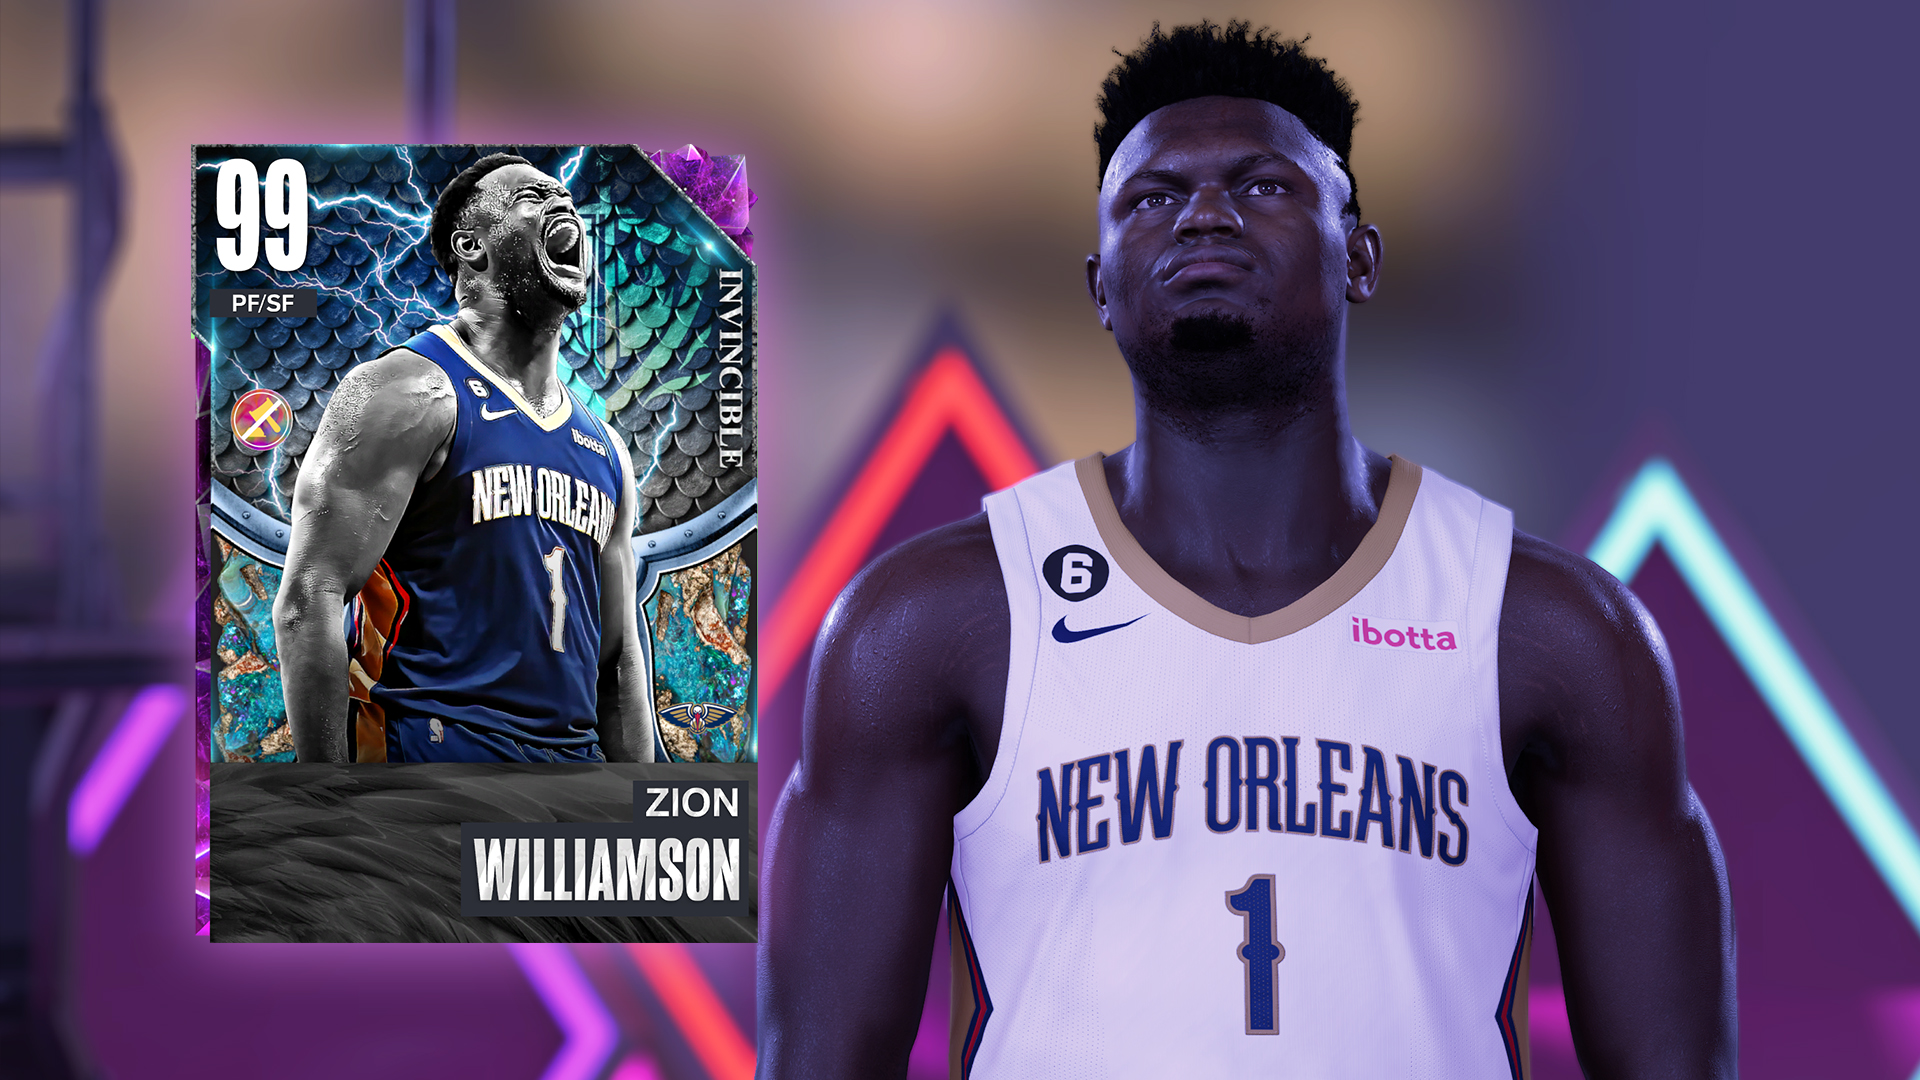 NBA 2K23 Season 7 Rewards, Patch Notes and New Content Revealed